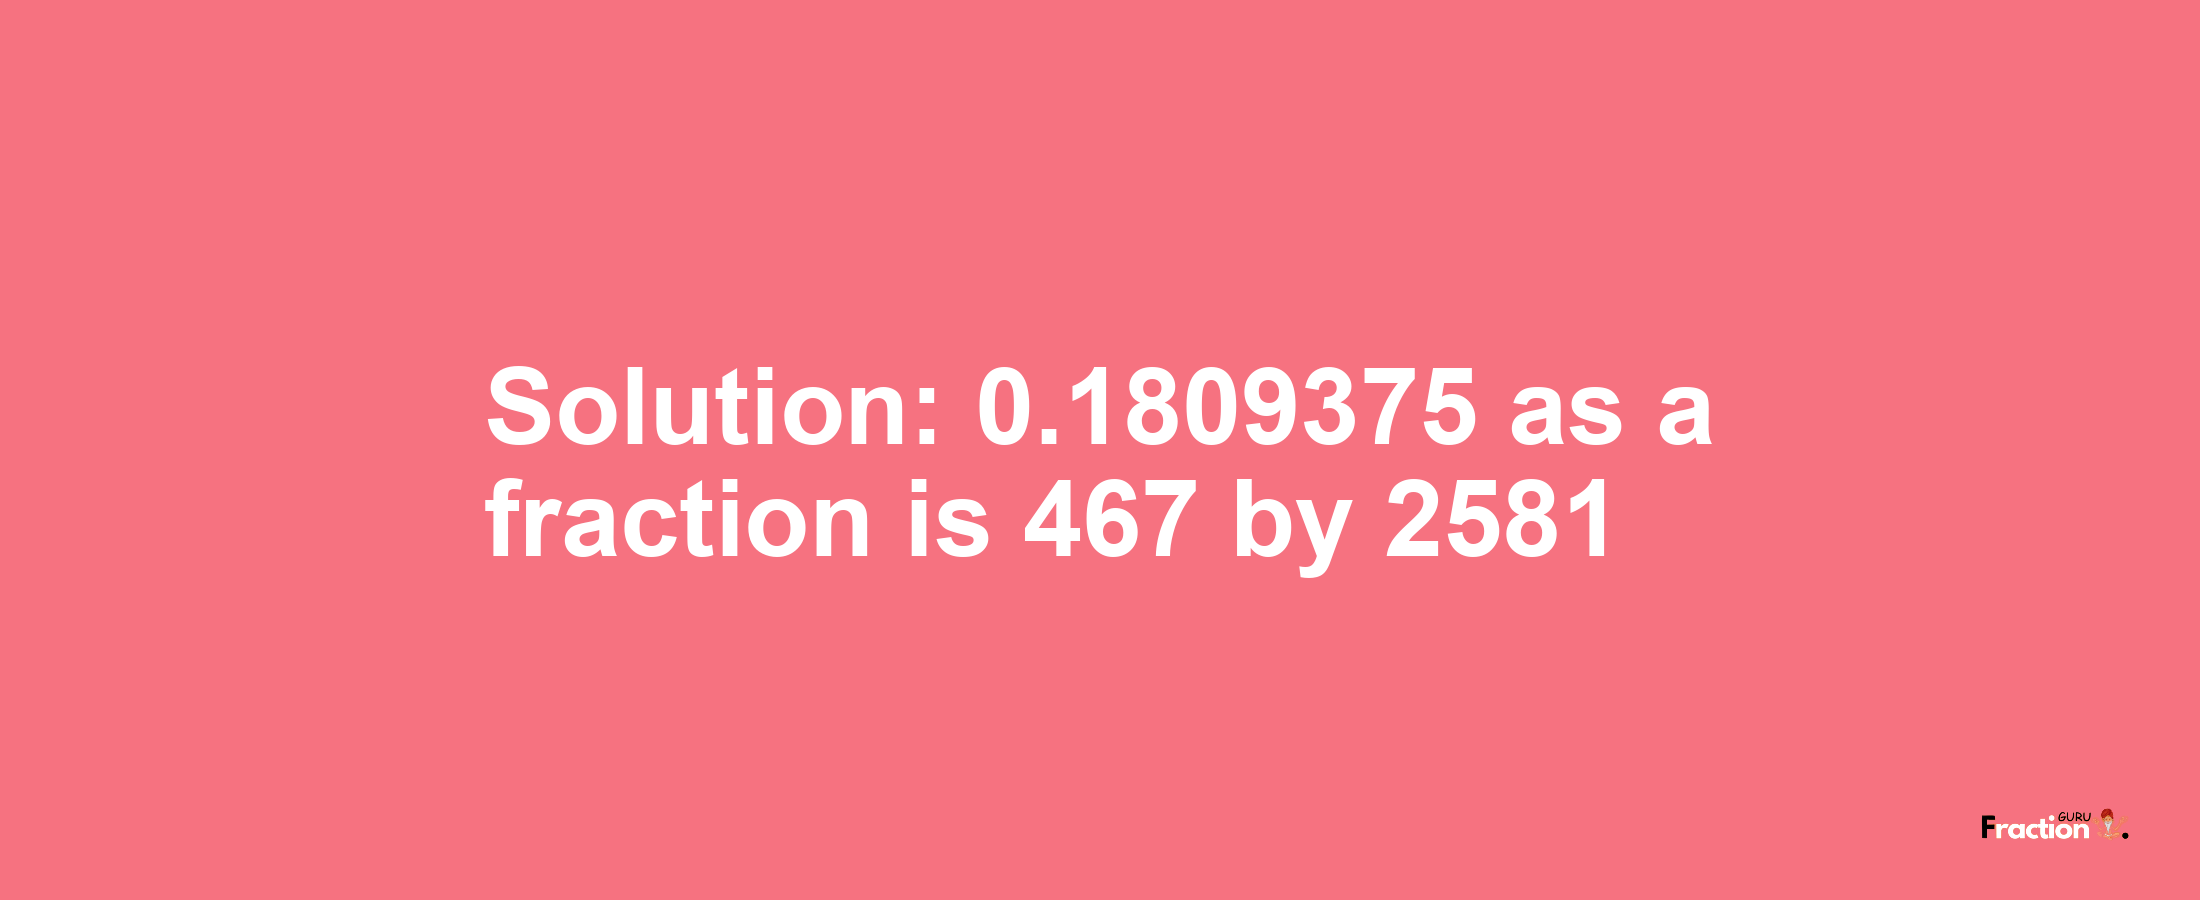 Solution:0.1809375 as a fraction is 467/2581